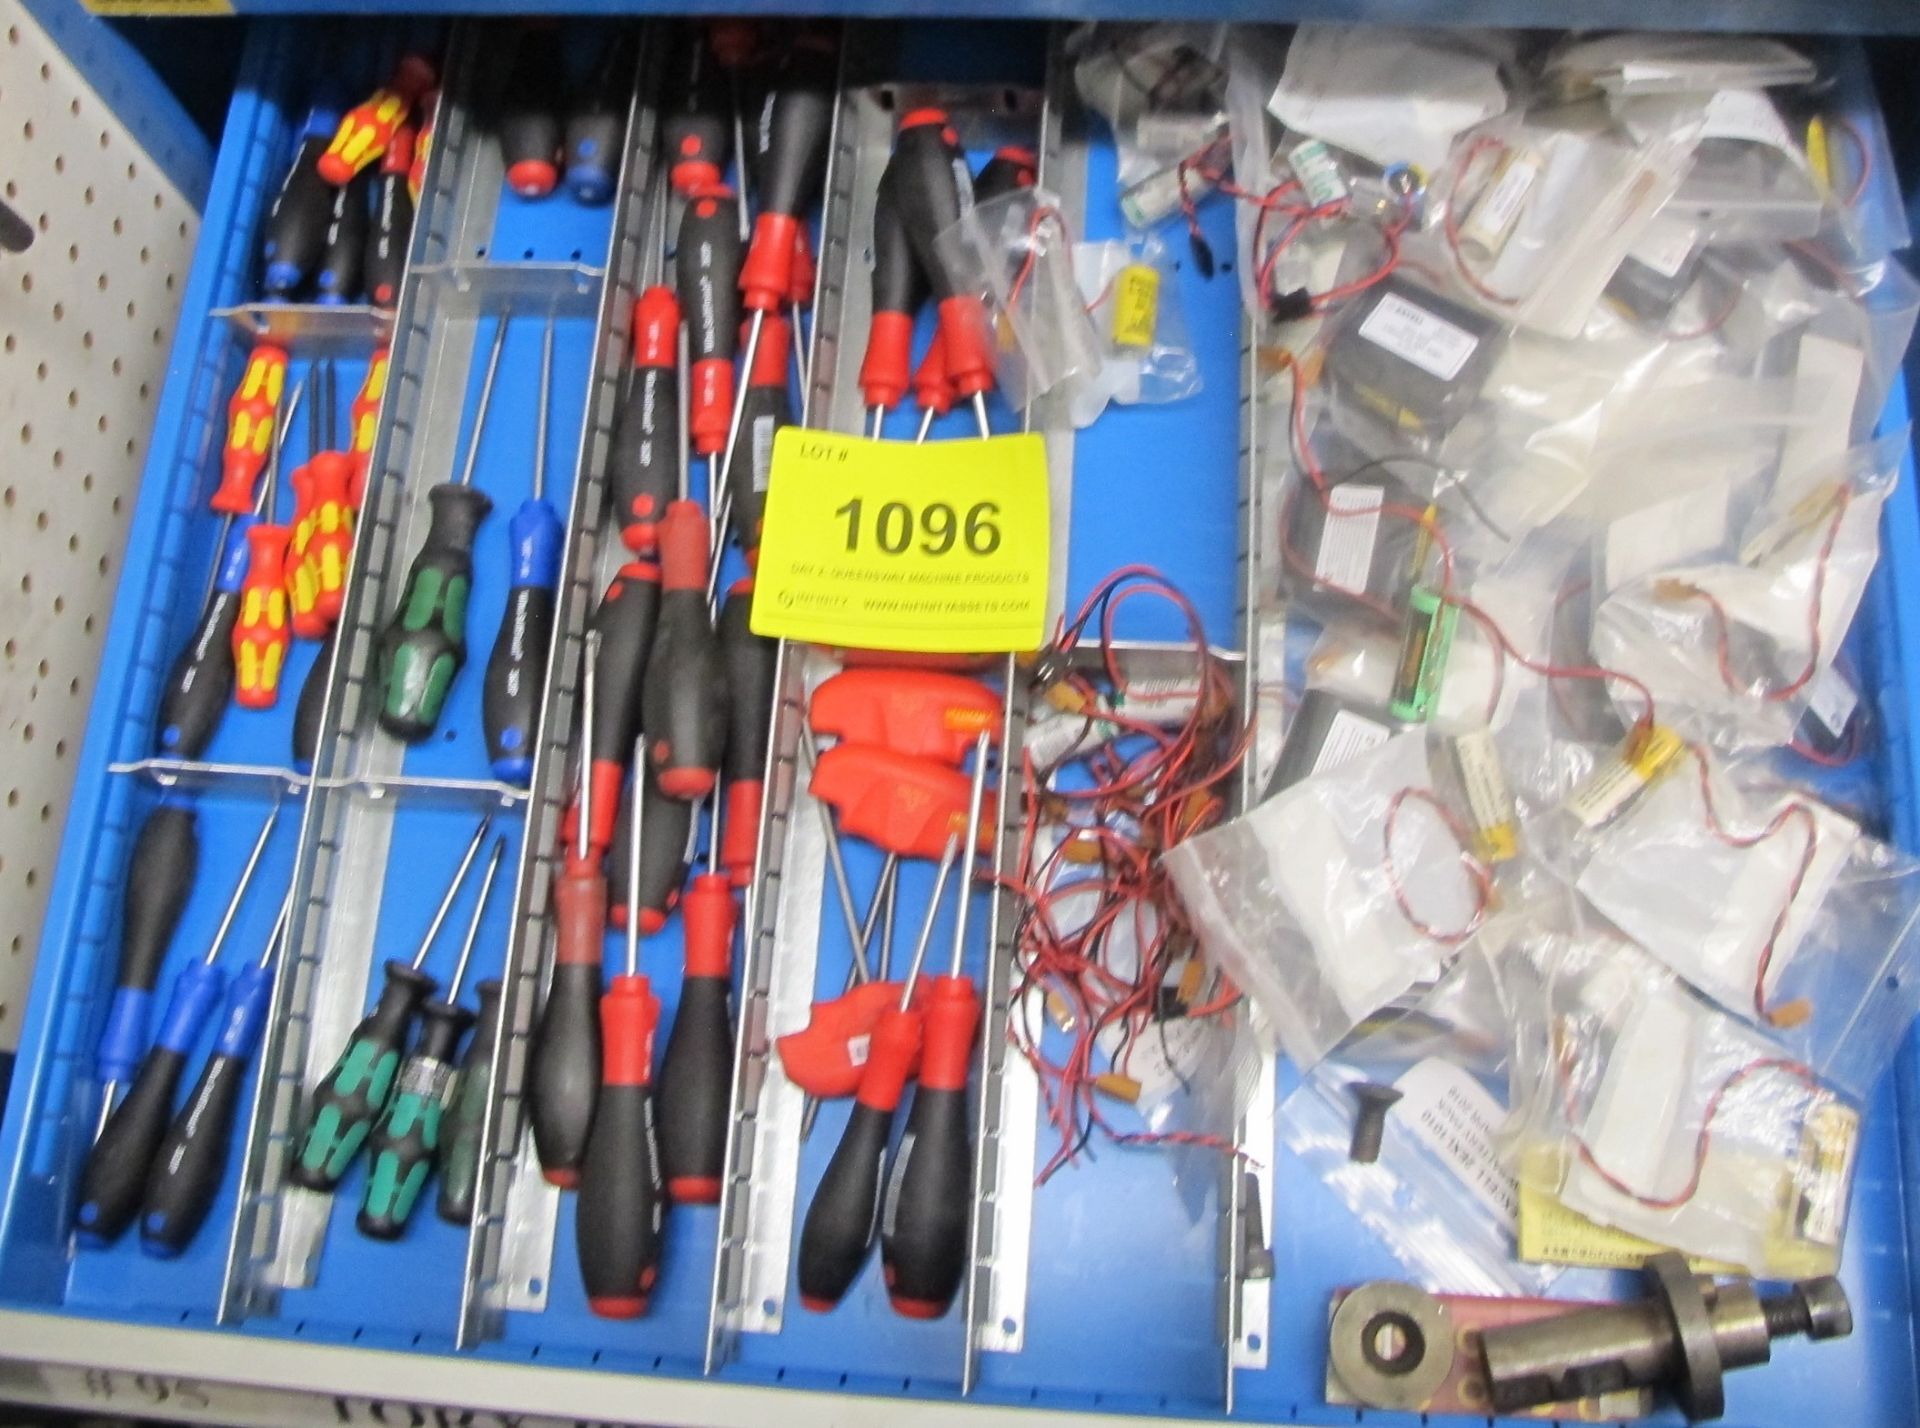 CONTENTS OF 1-DRAWER OF SUSTA TOOL CABINET INCLUDING DRIVERS, BATTERIES